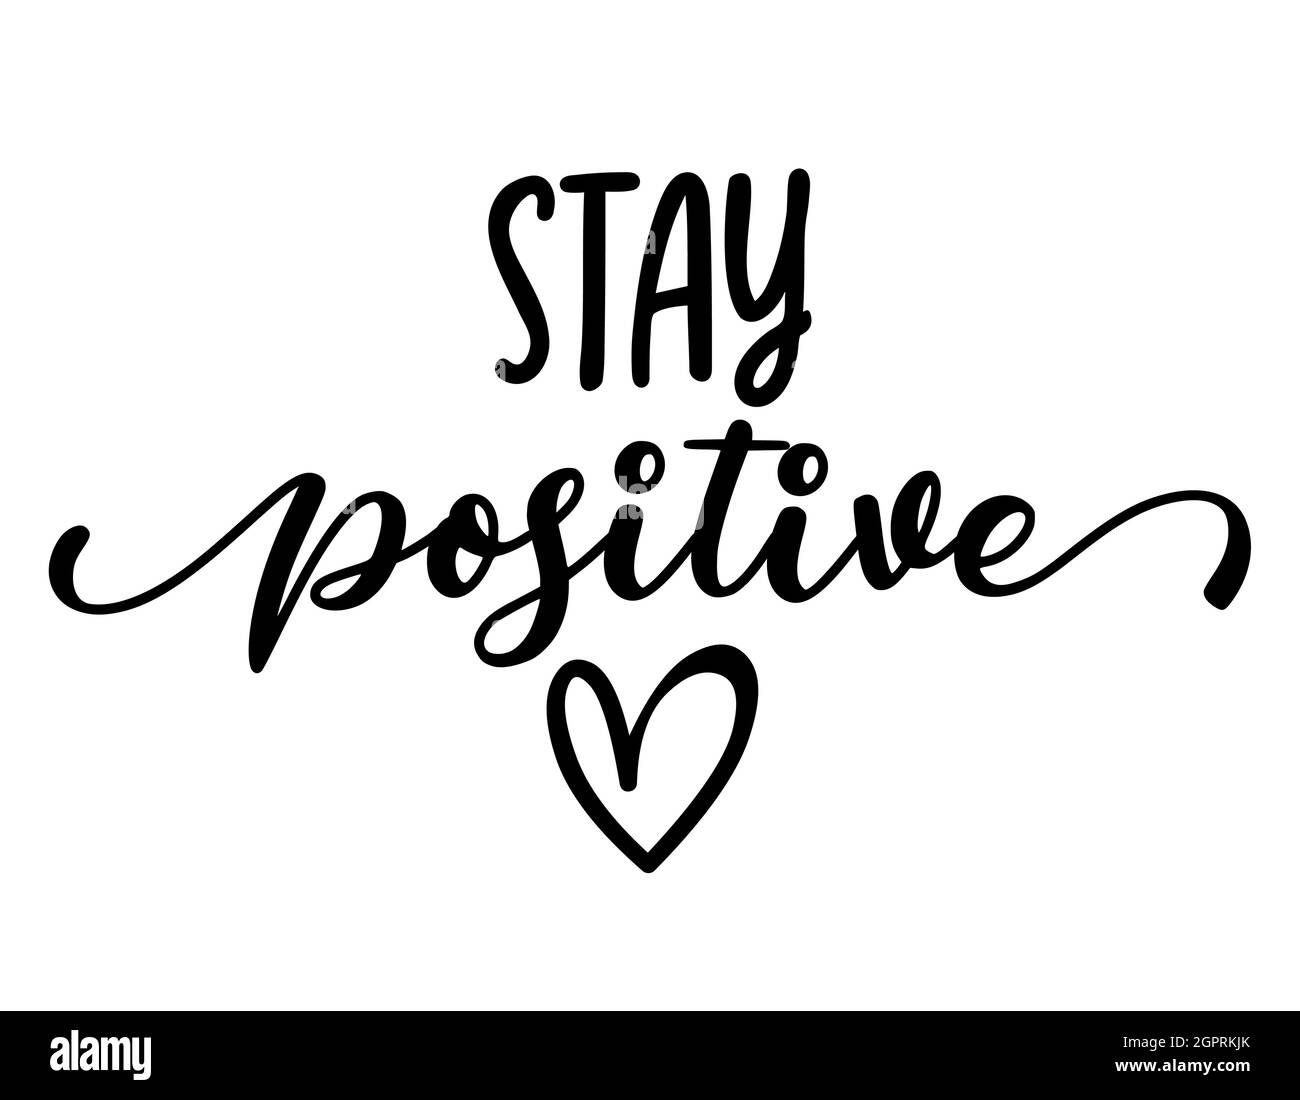 Stay positive - lovely lettering calligraphy quote. Handwritten ...